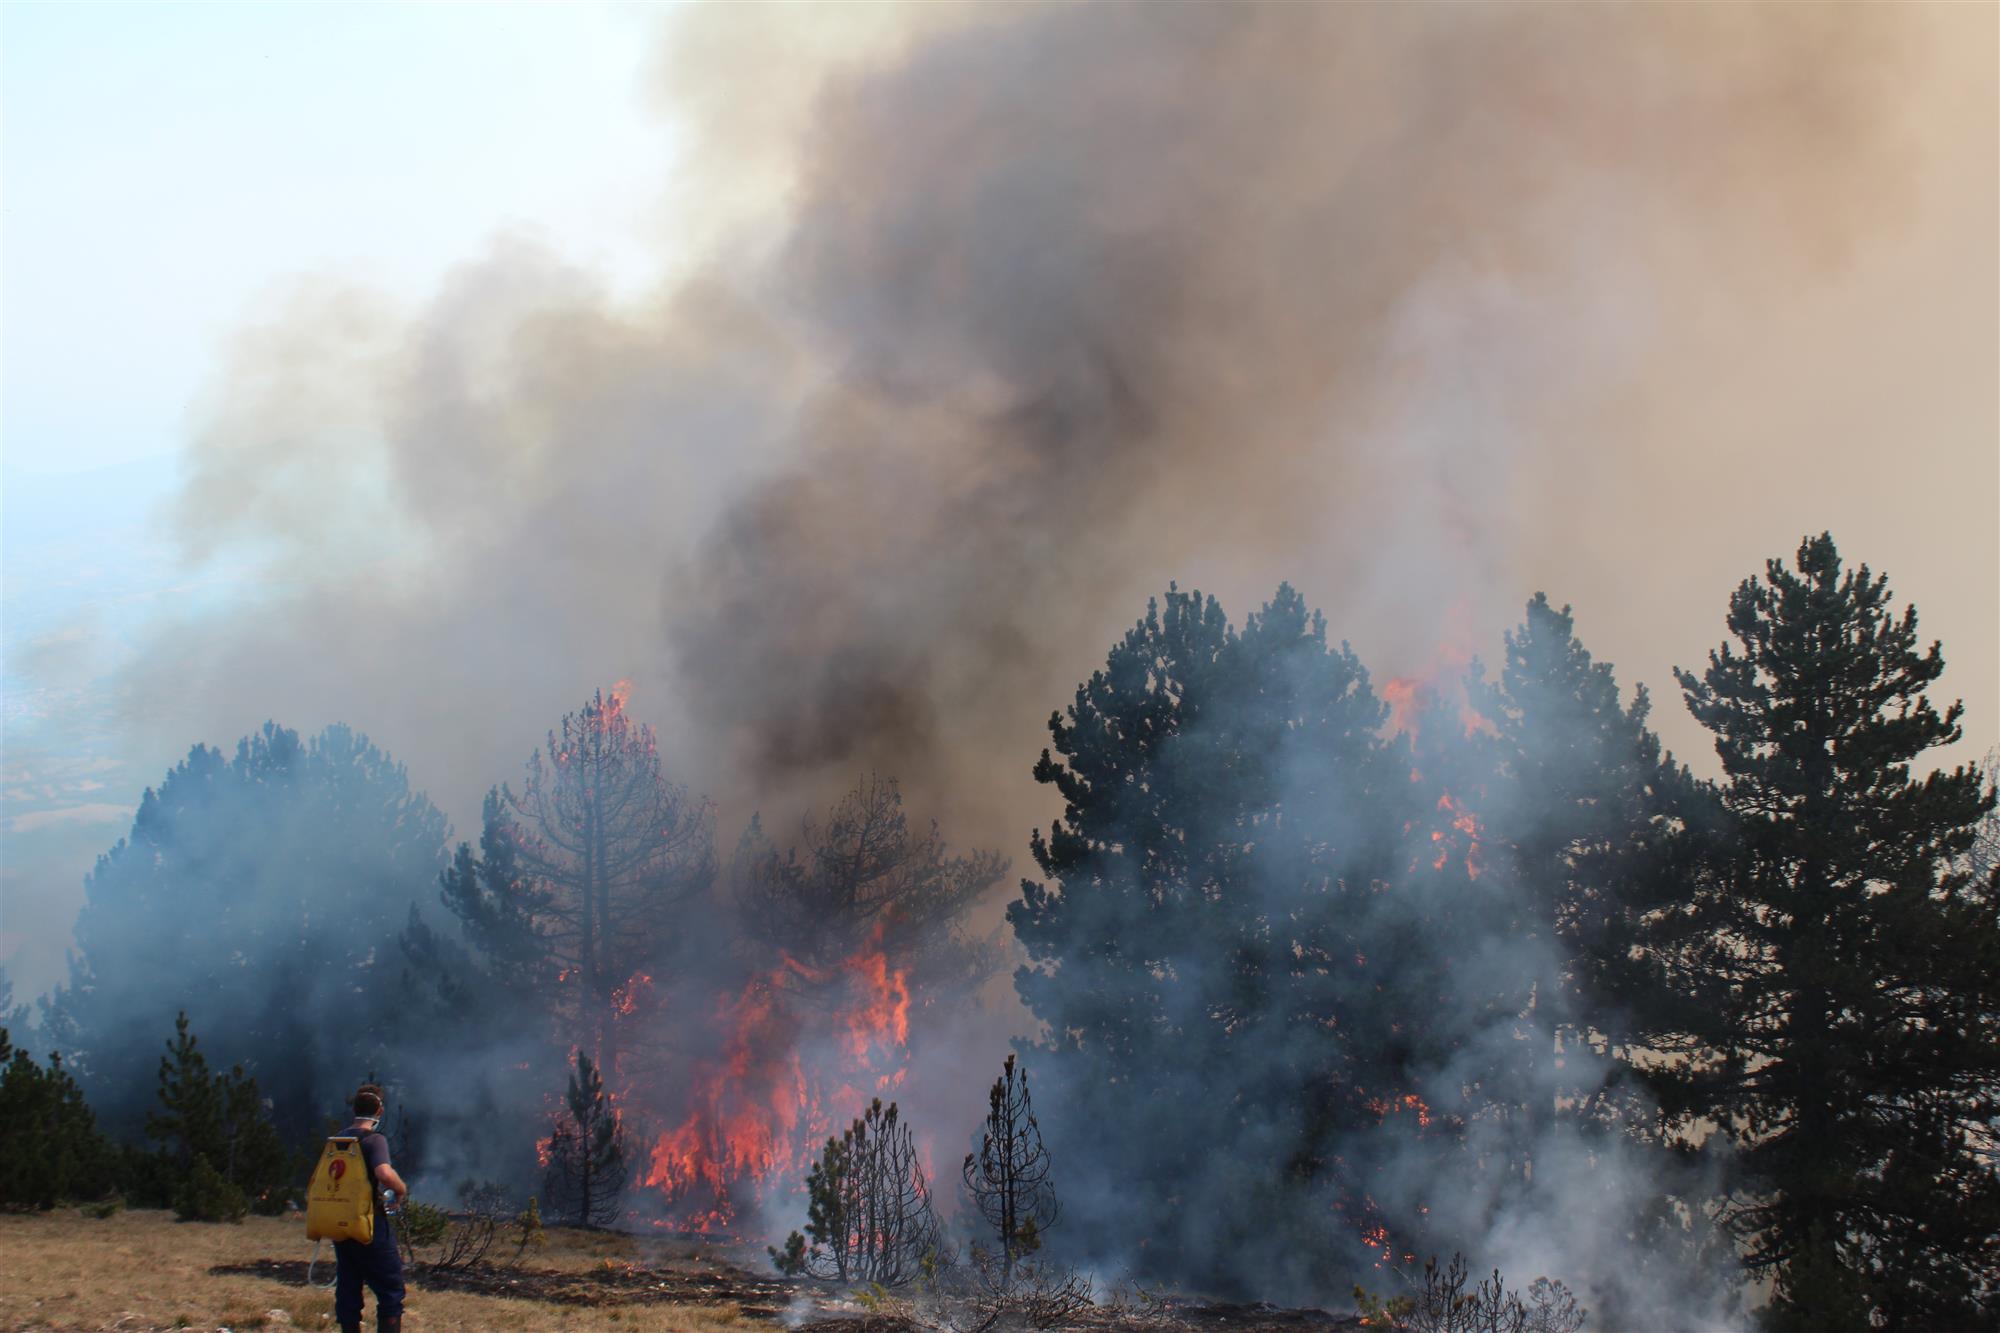 APPEAL TO PUBLIC - TEMPERATURE SPIKE INCREASES WILDFIRE RISK!